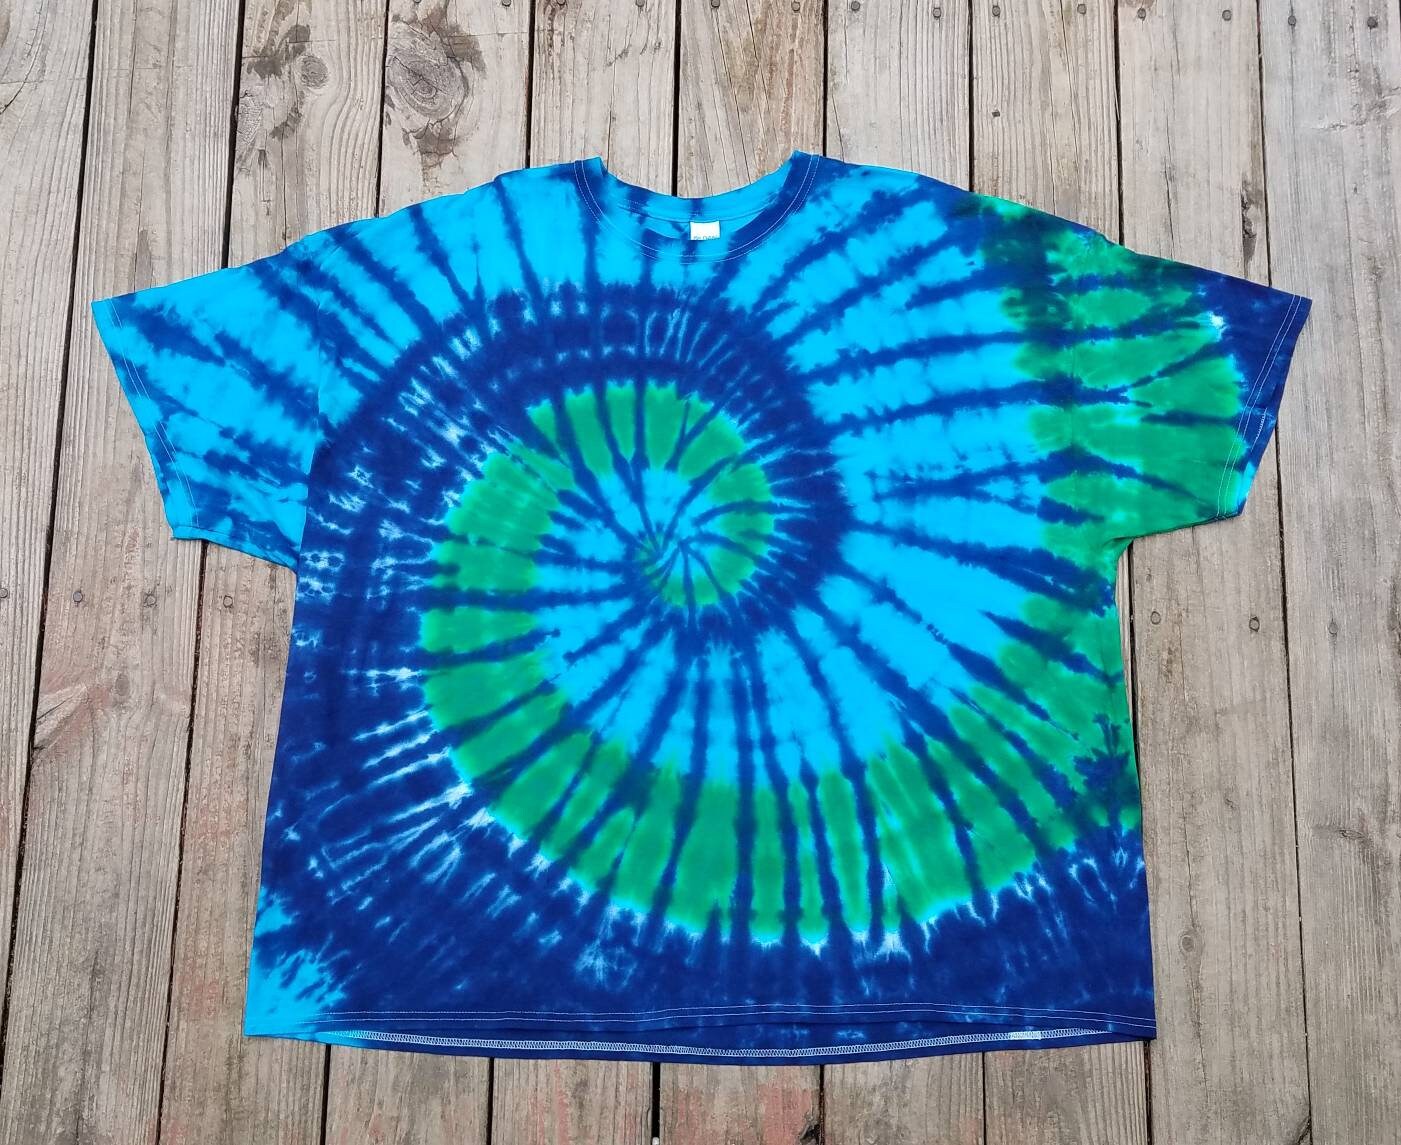 Blue and Green Tie Dye Tshirt, Available Sizes S M L XL XXL 3XL